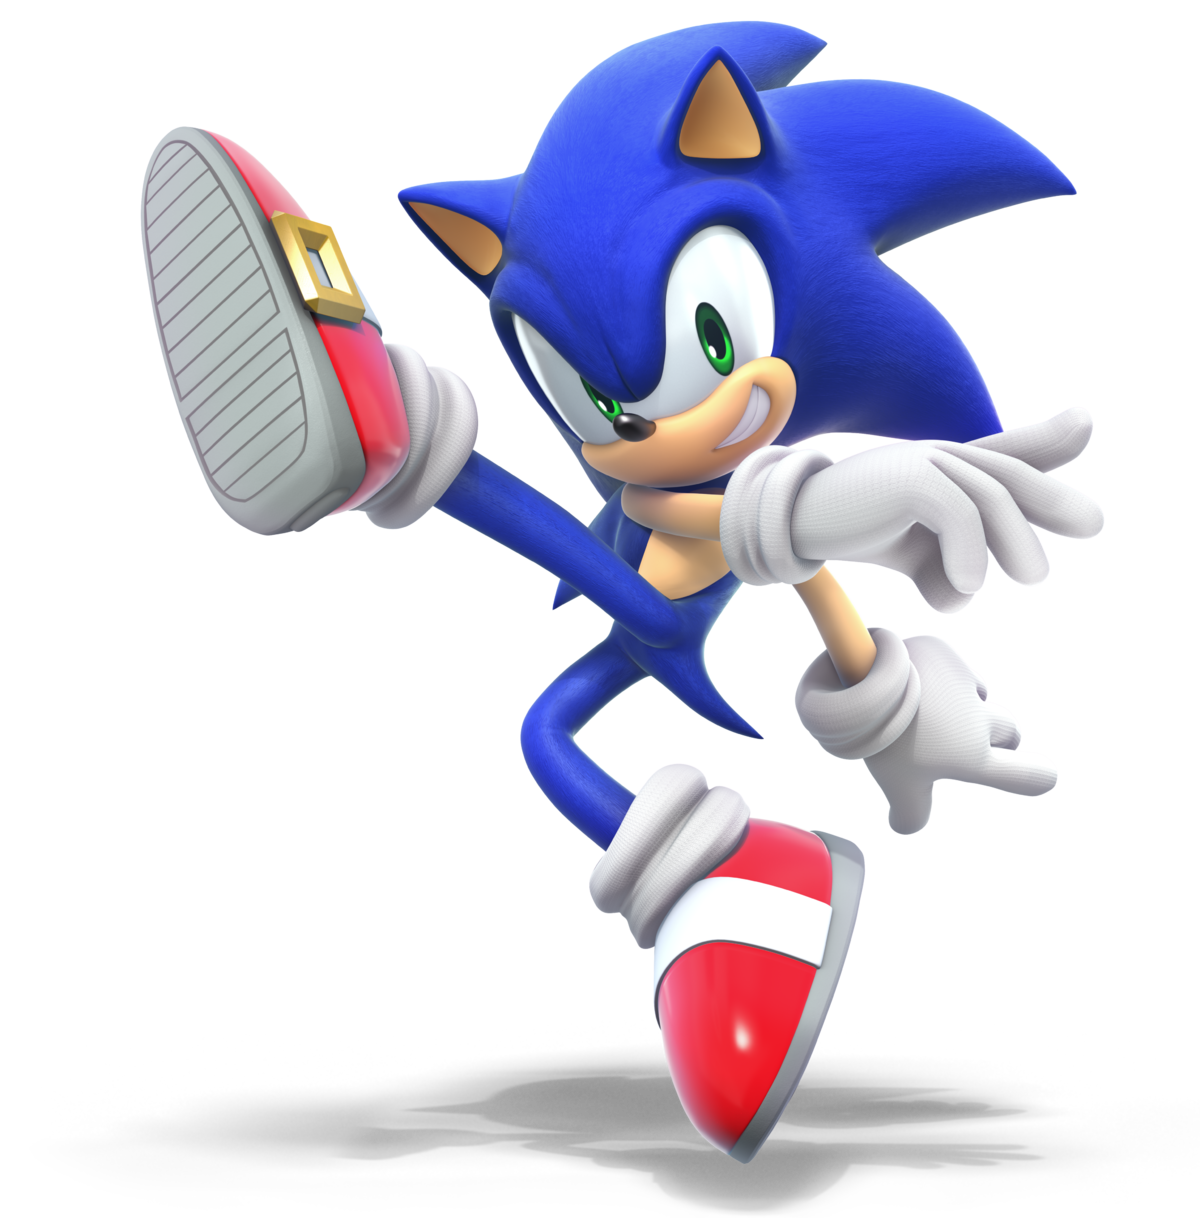 Sonic the Hedgehog is the eponymous main protagonist of the Sonic the Hedge...